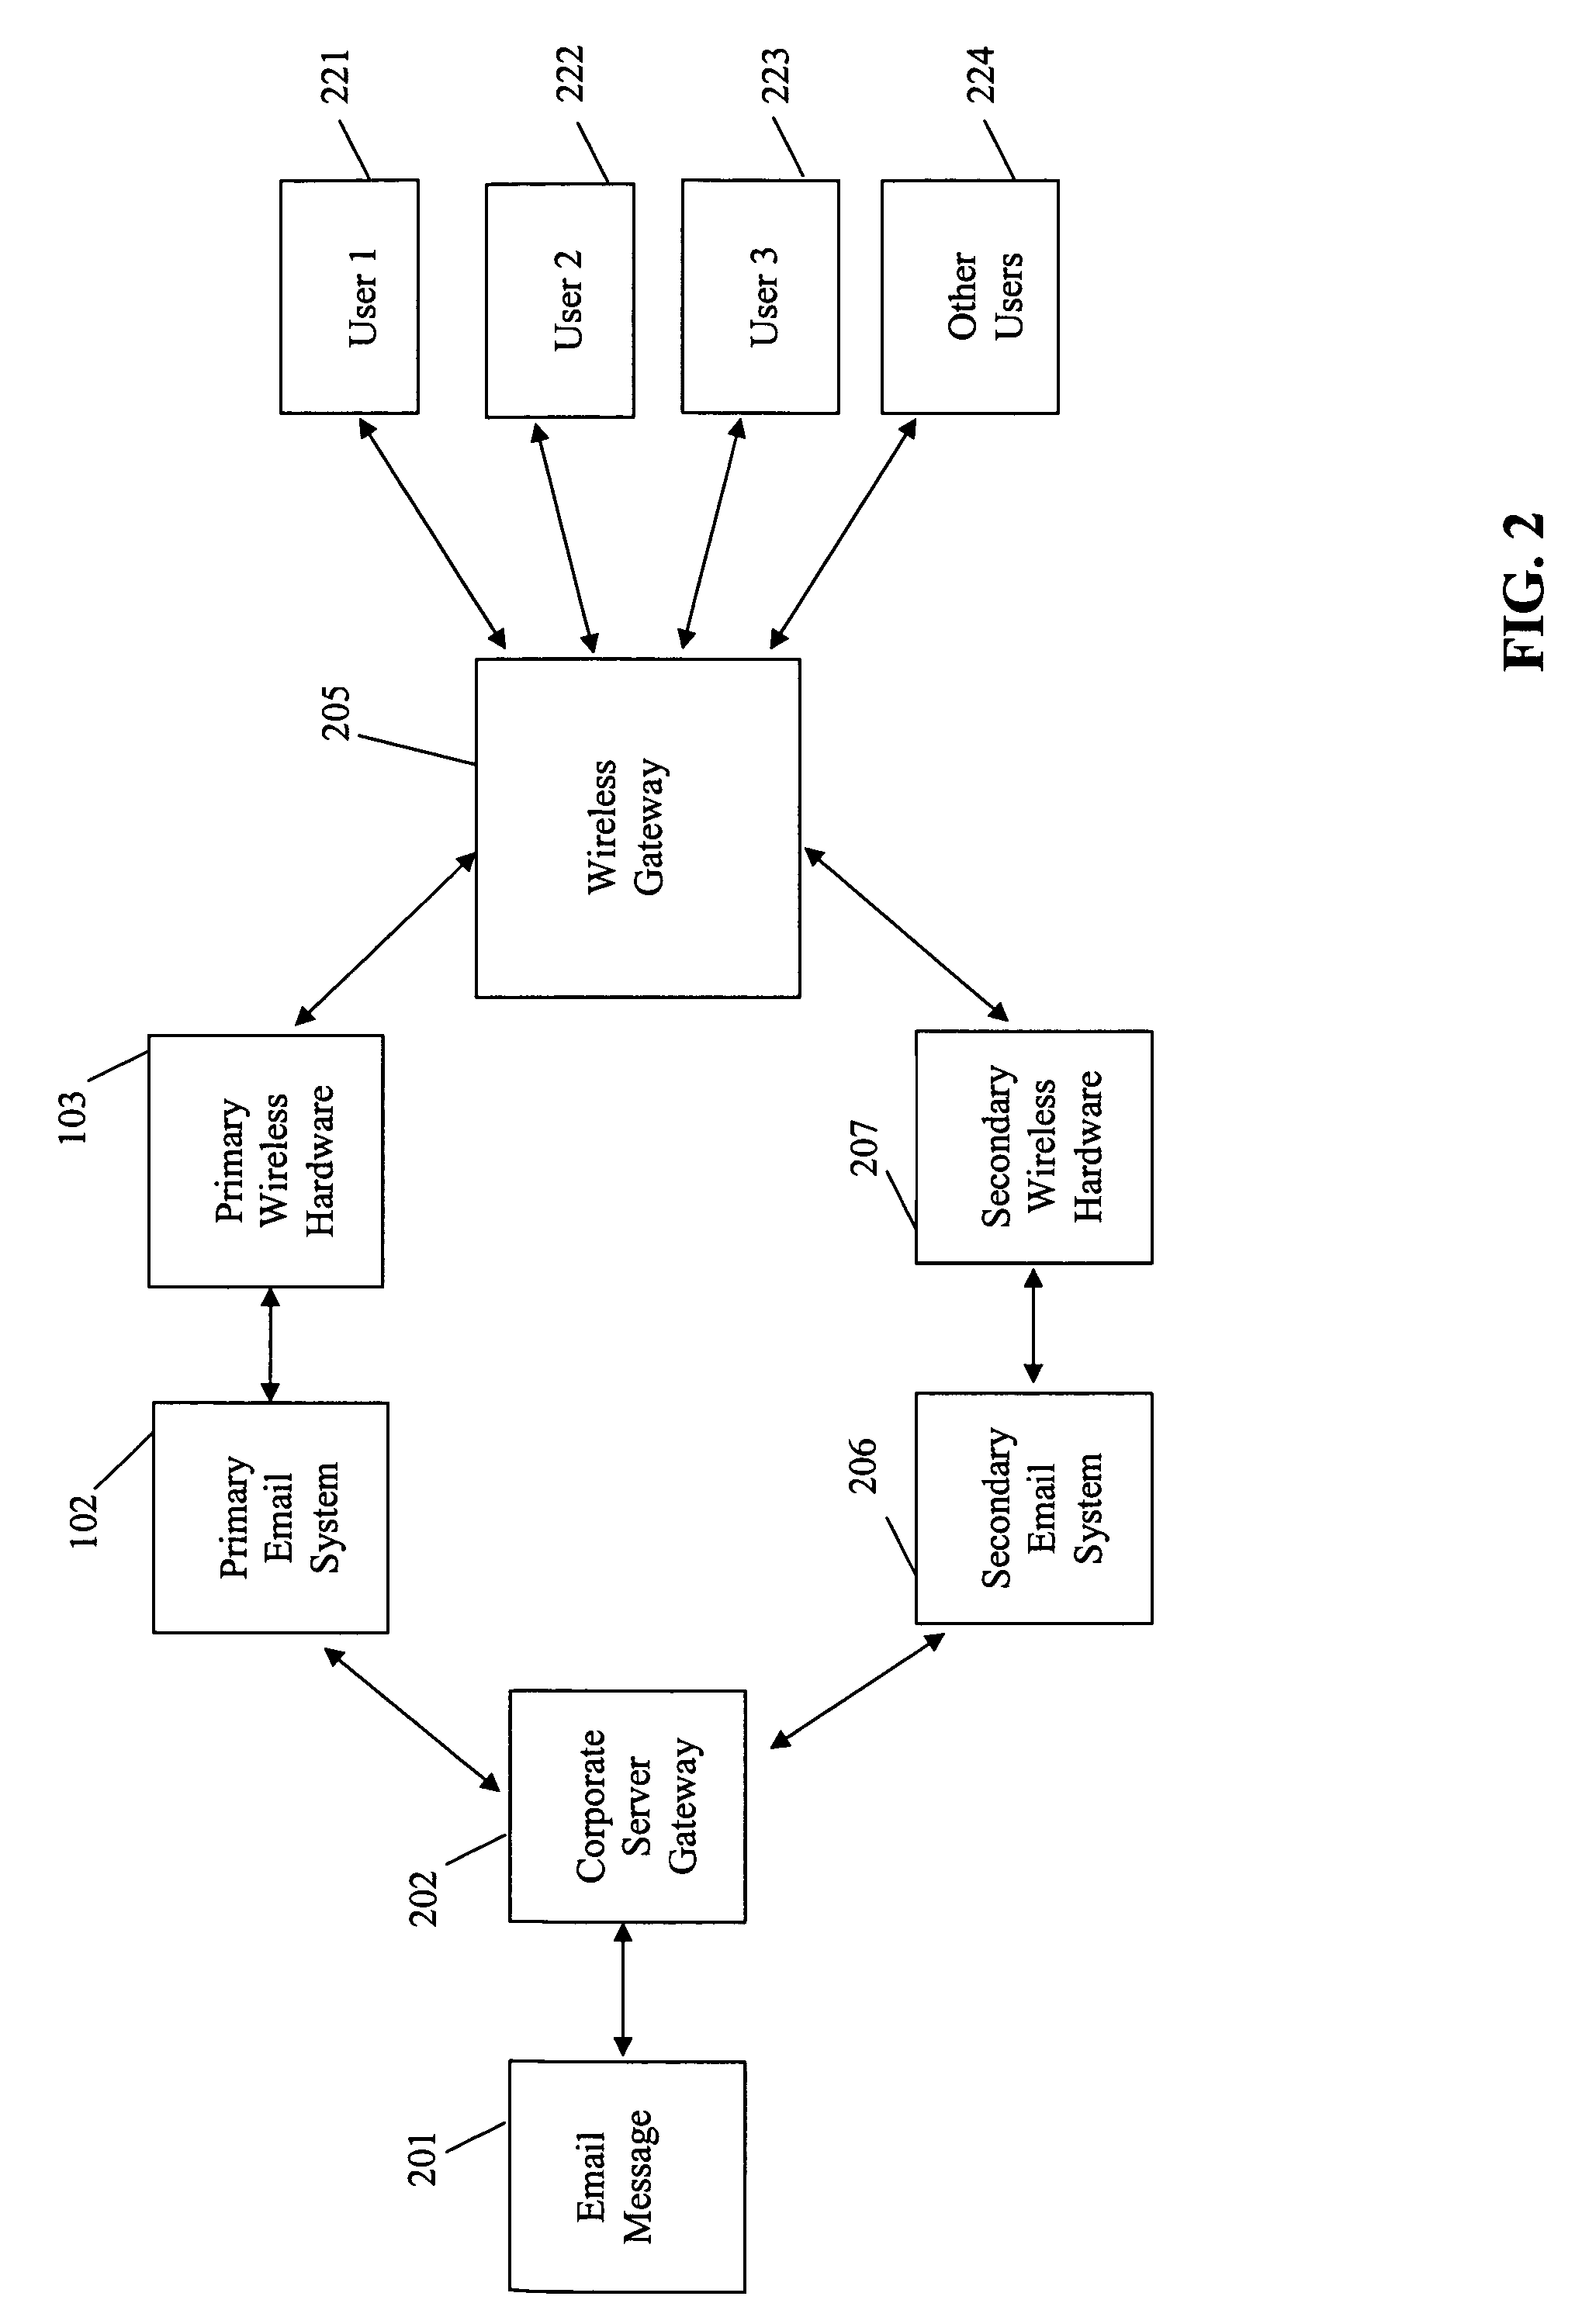 Method and system for providing backup messages to wireless devices during outages